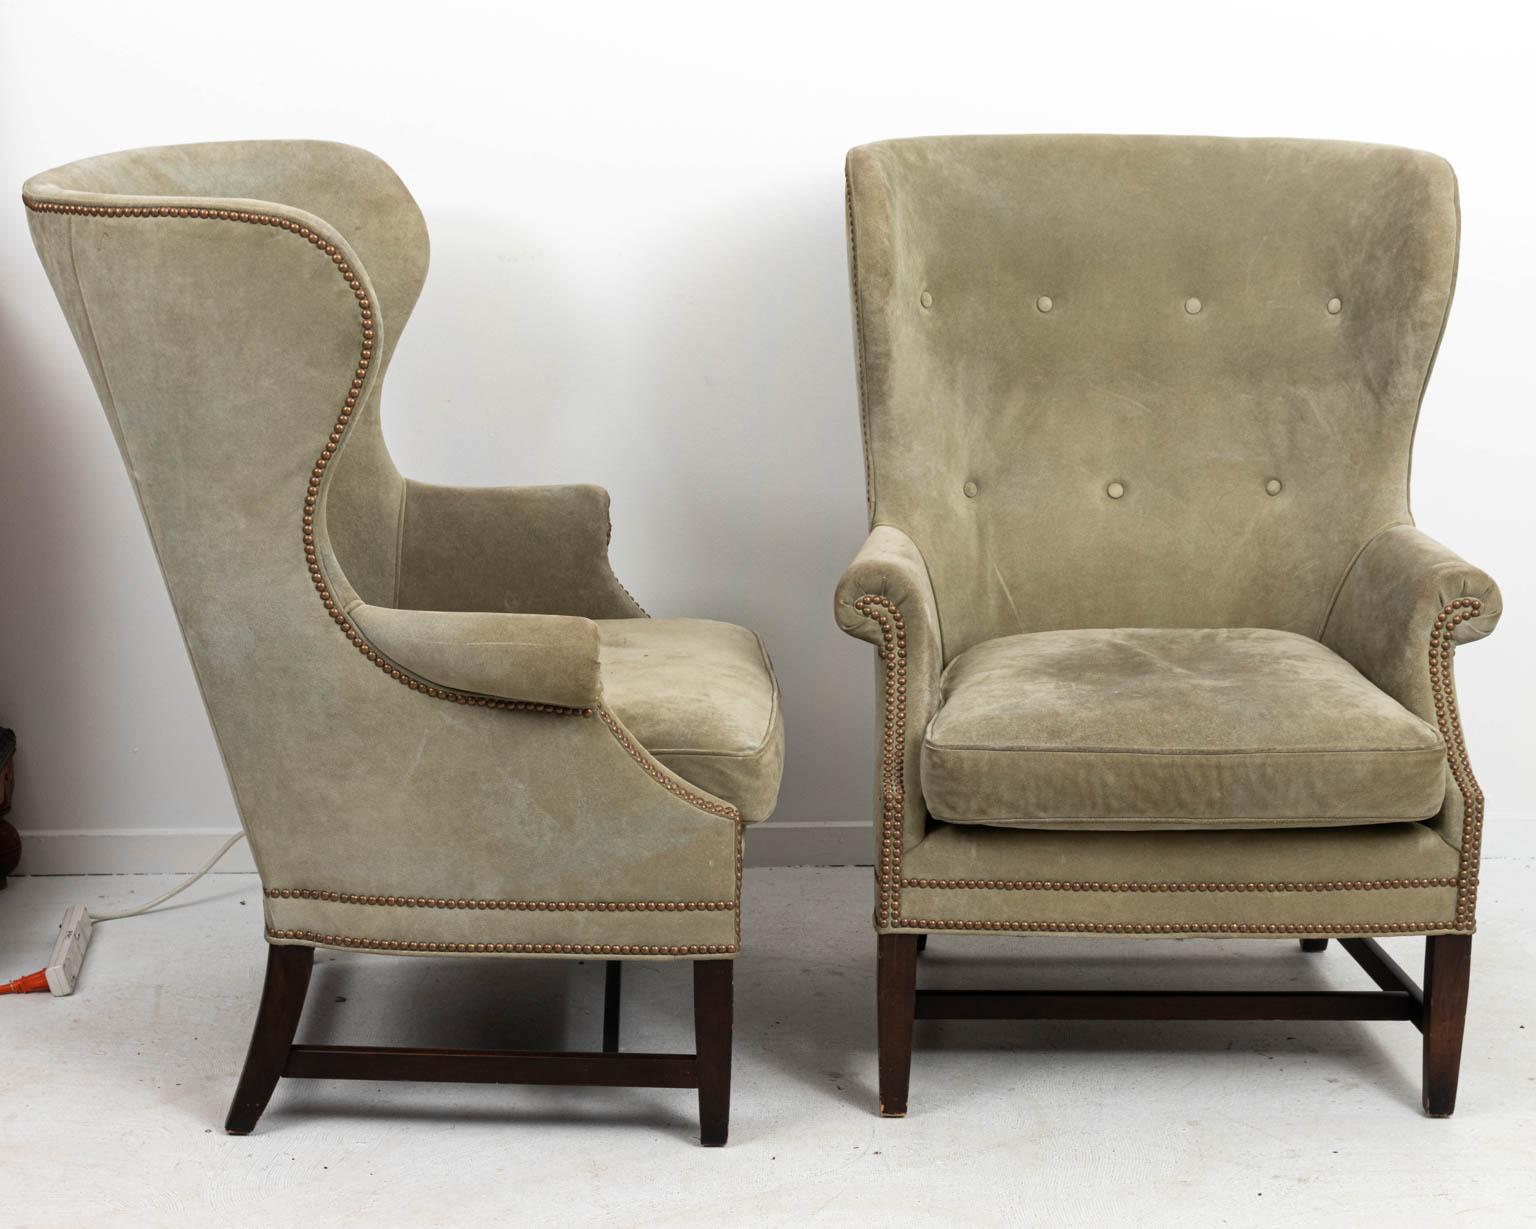 Pair of Green Suede Upholstered Wing Back Chairs 1